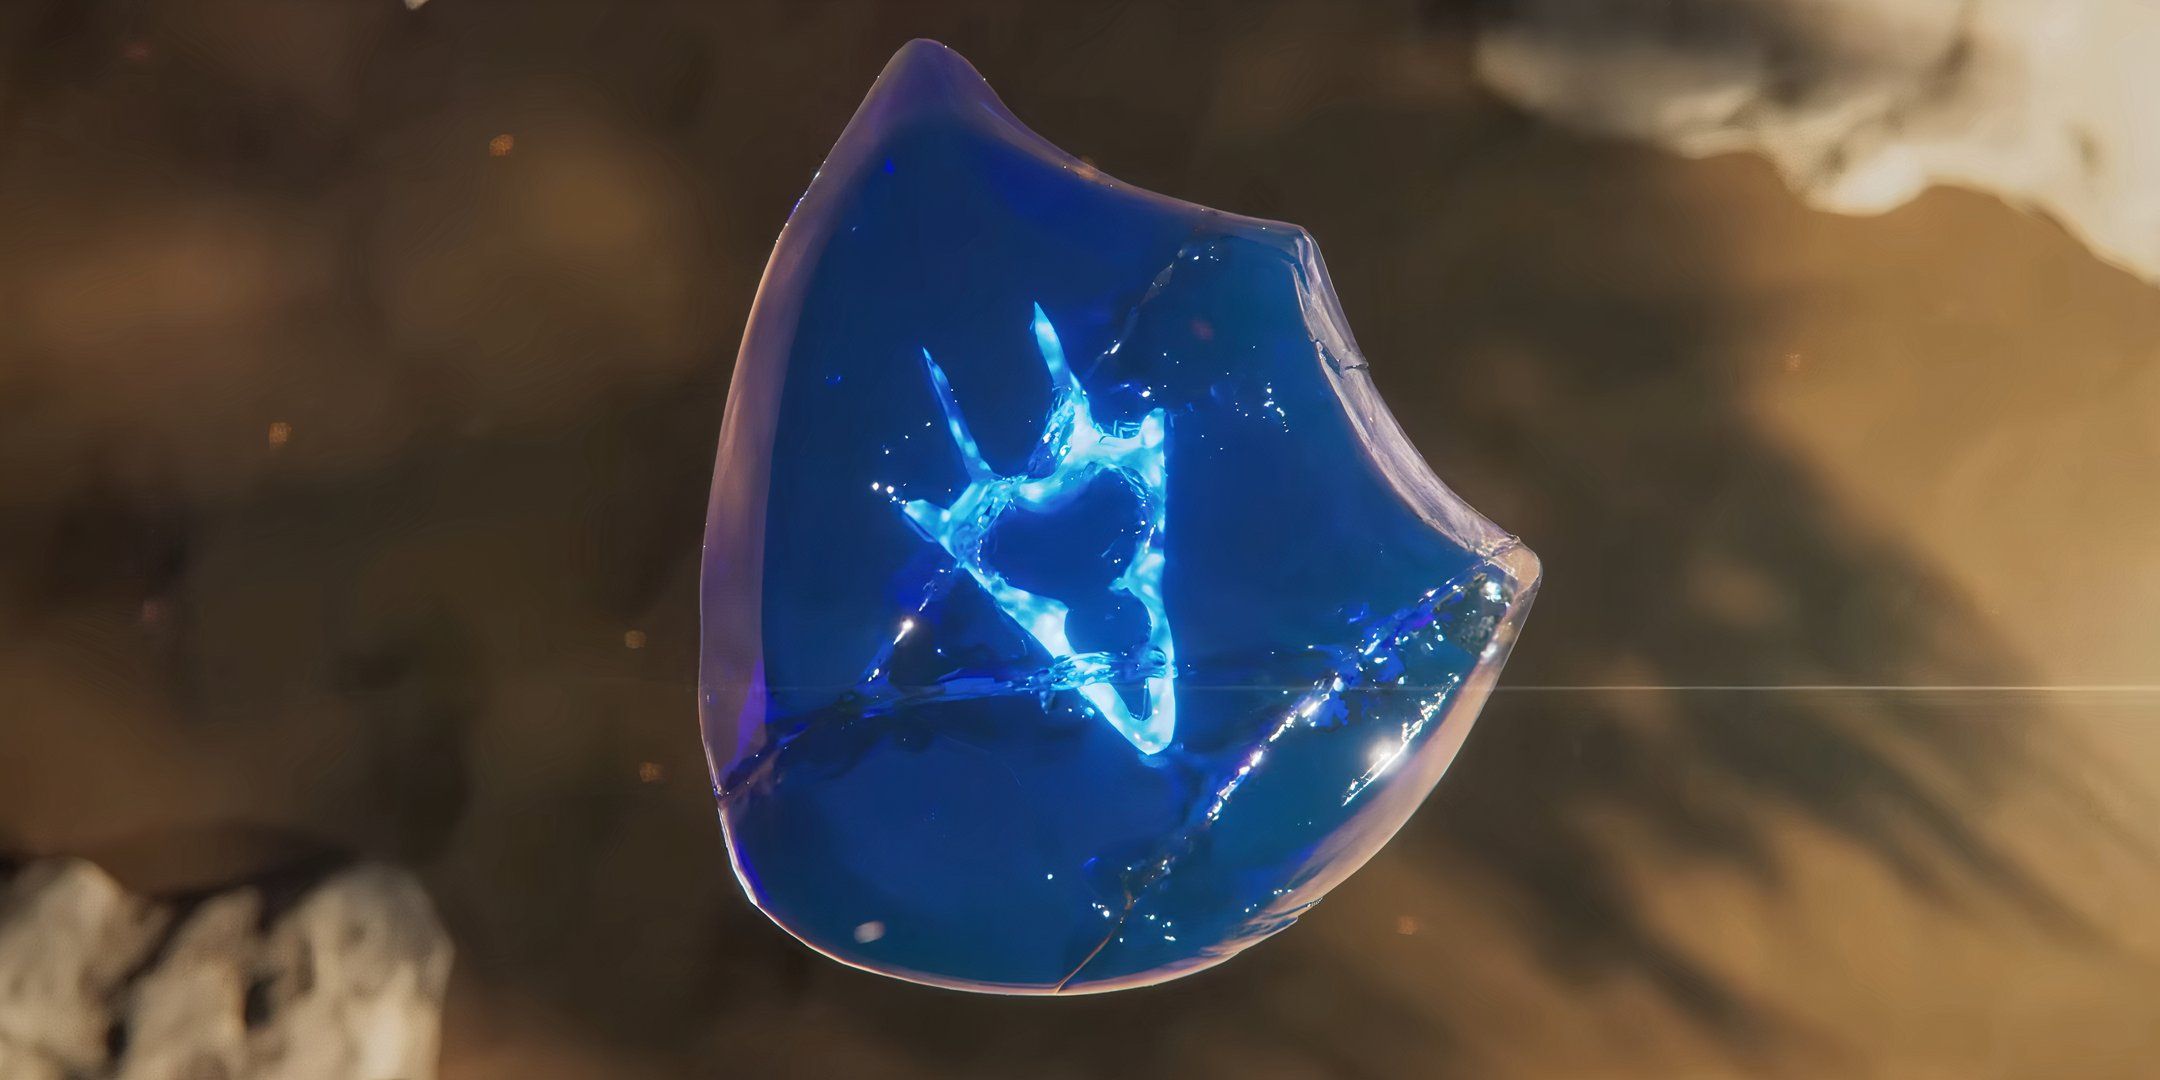 A blue job stone from Final fantasy 14